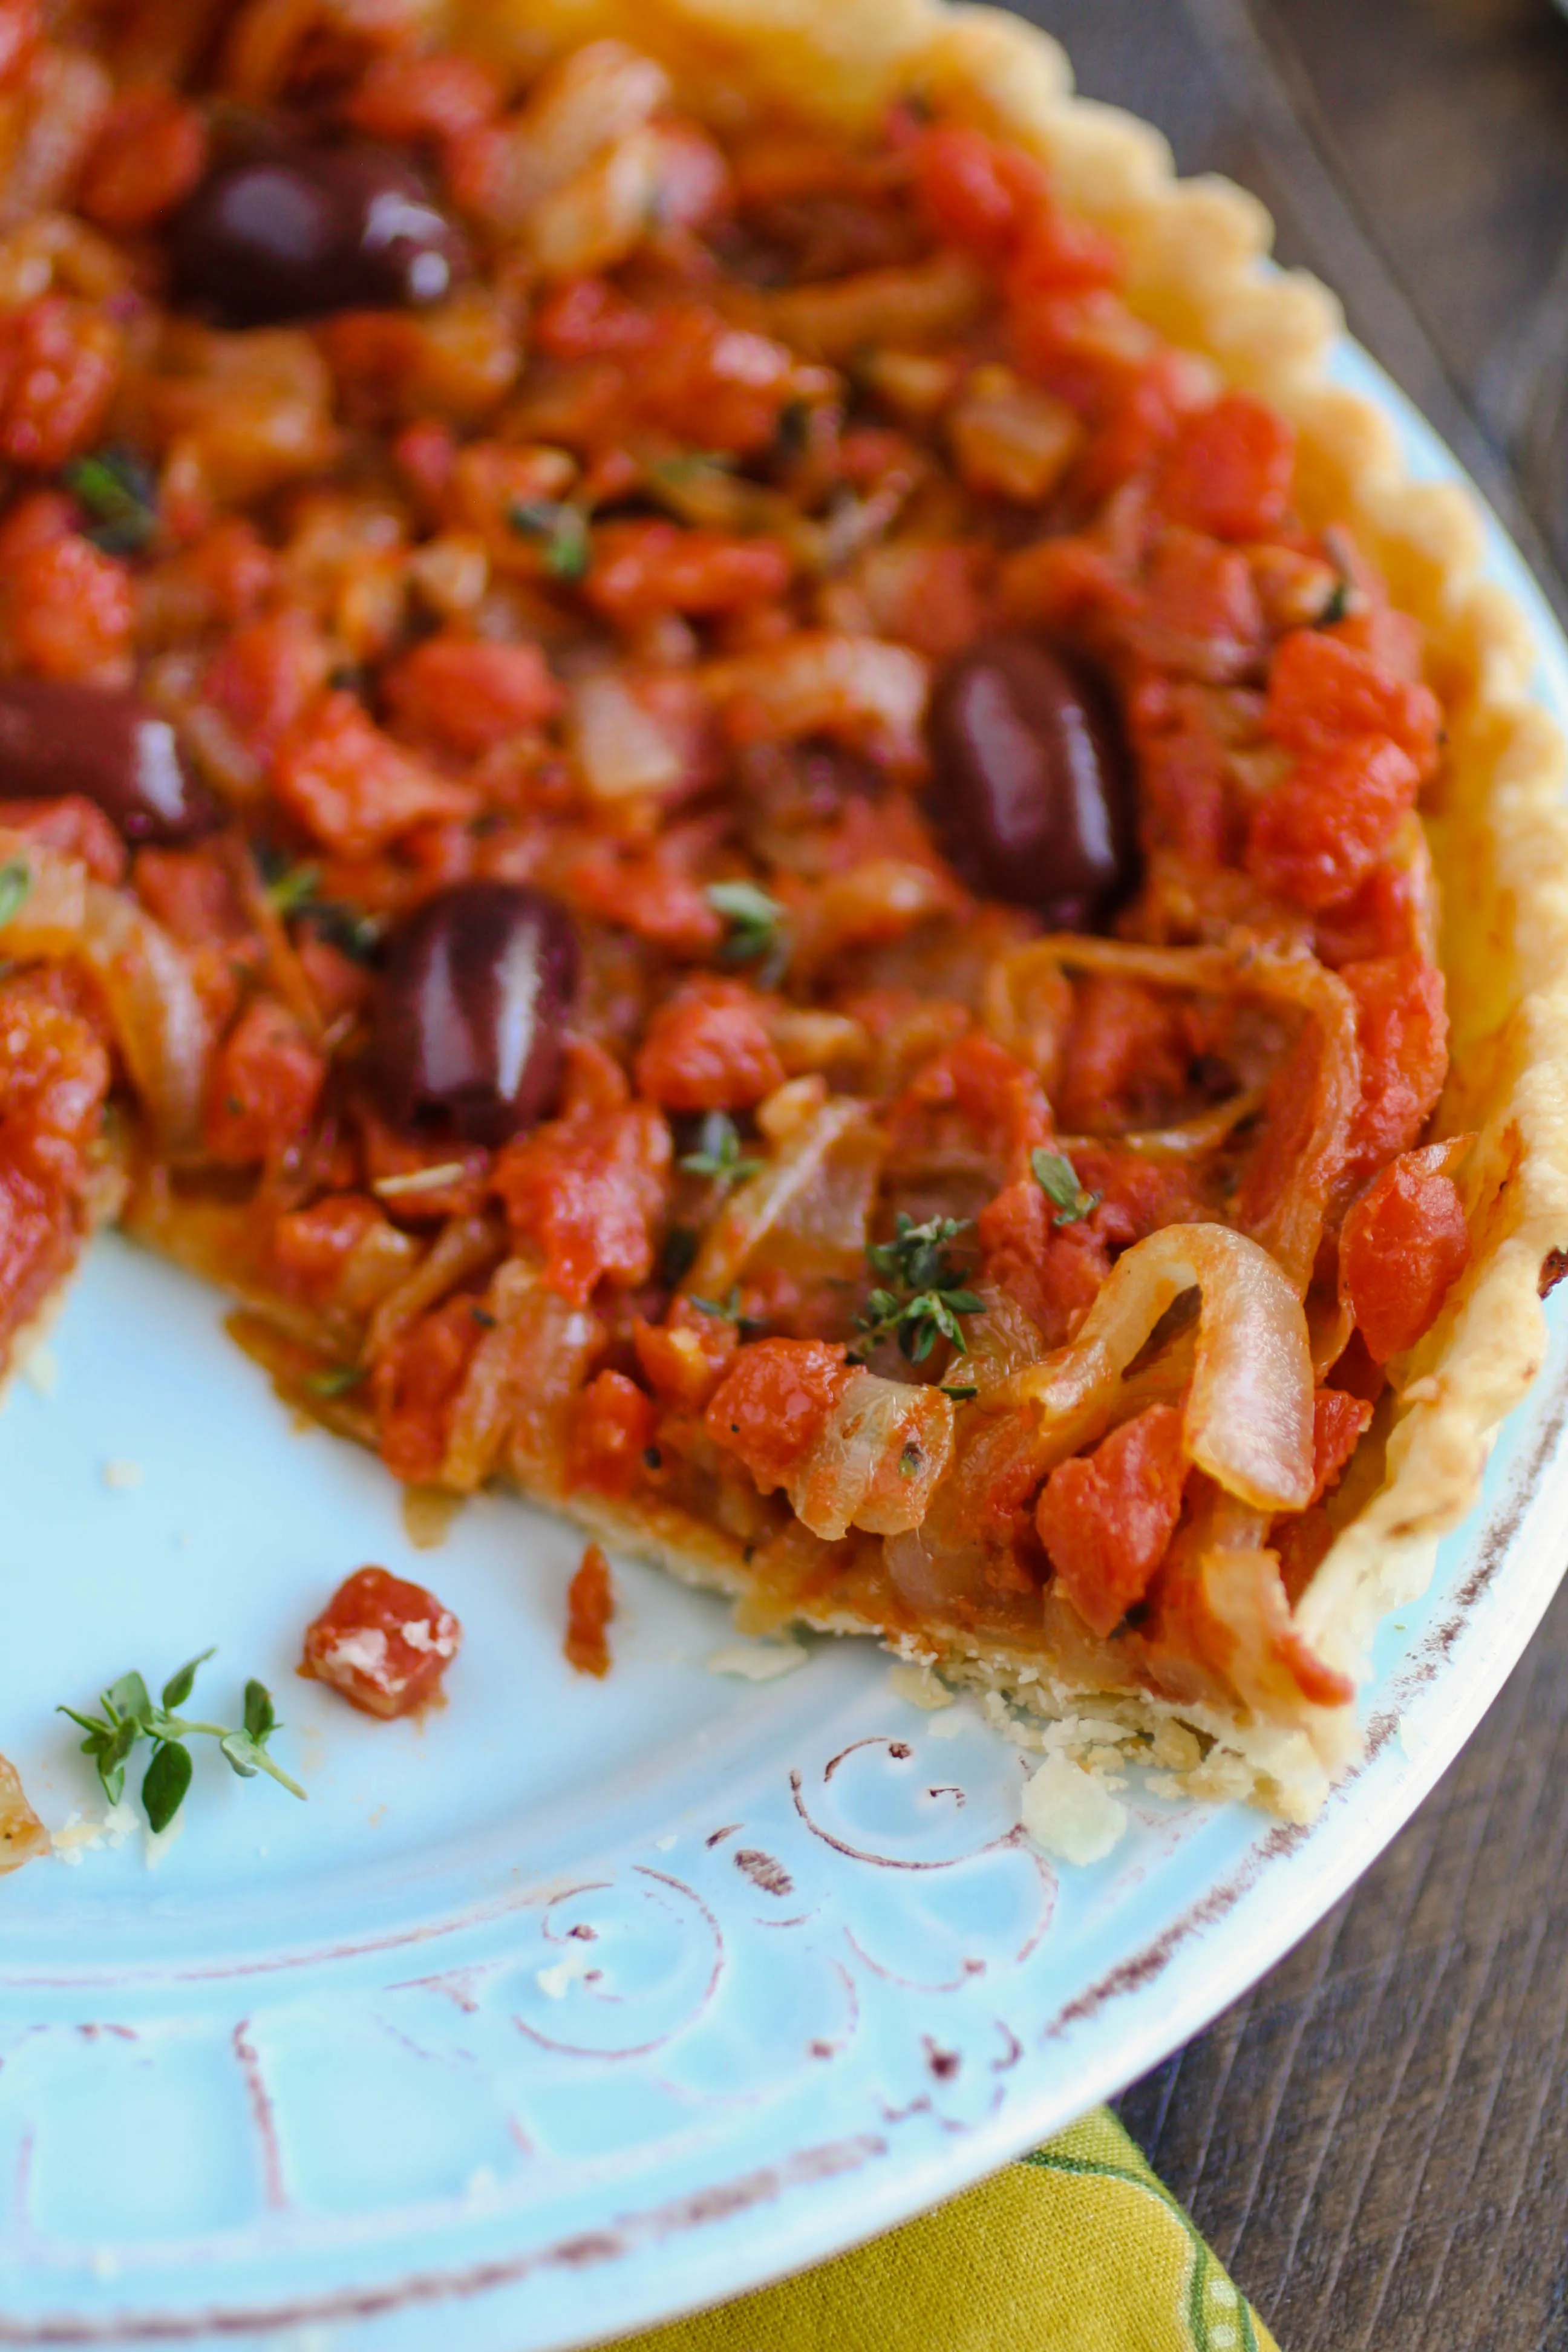 Pissaladière (French-style pizza) is a wonderful start for any meal or gathering. Serve this appetizer soon!